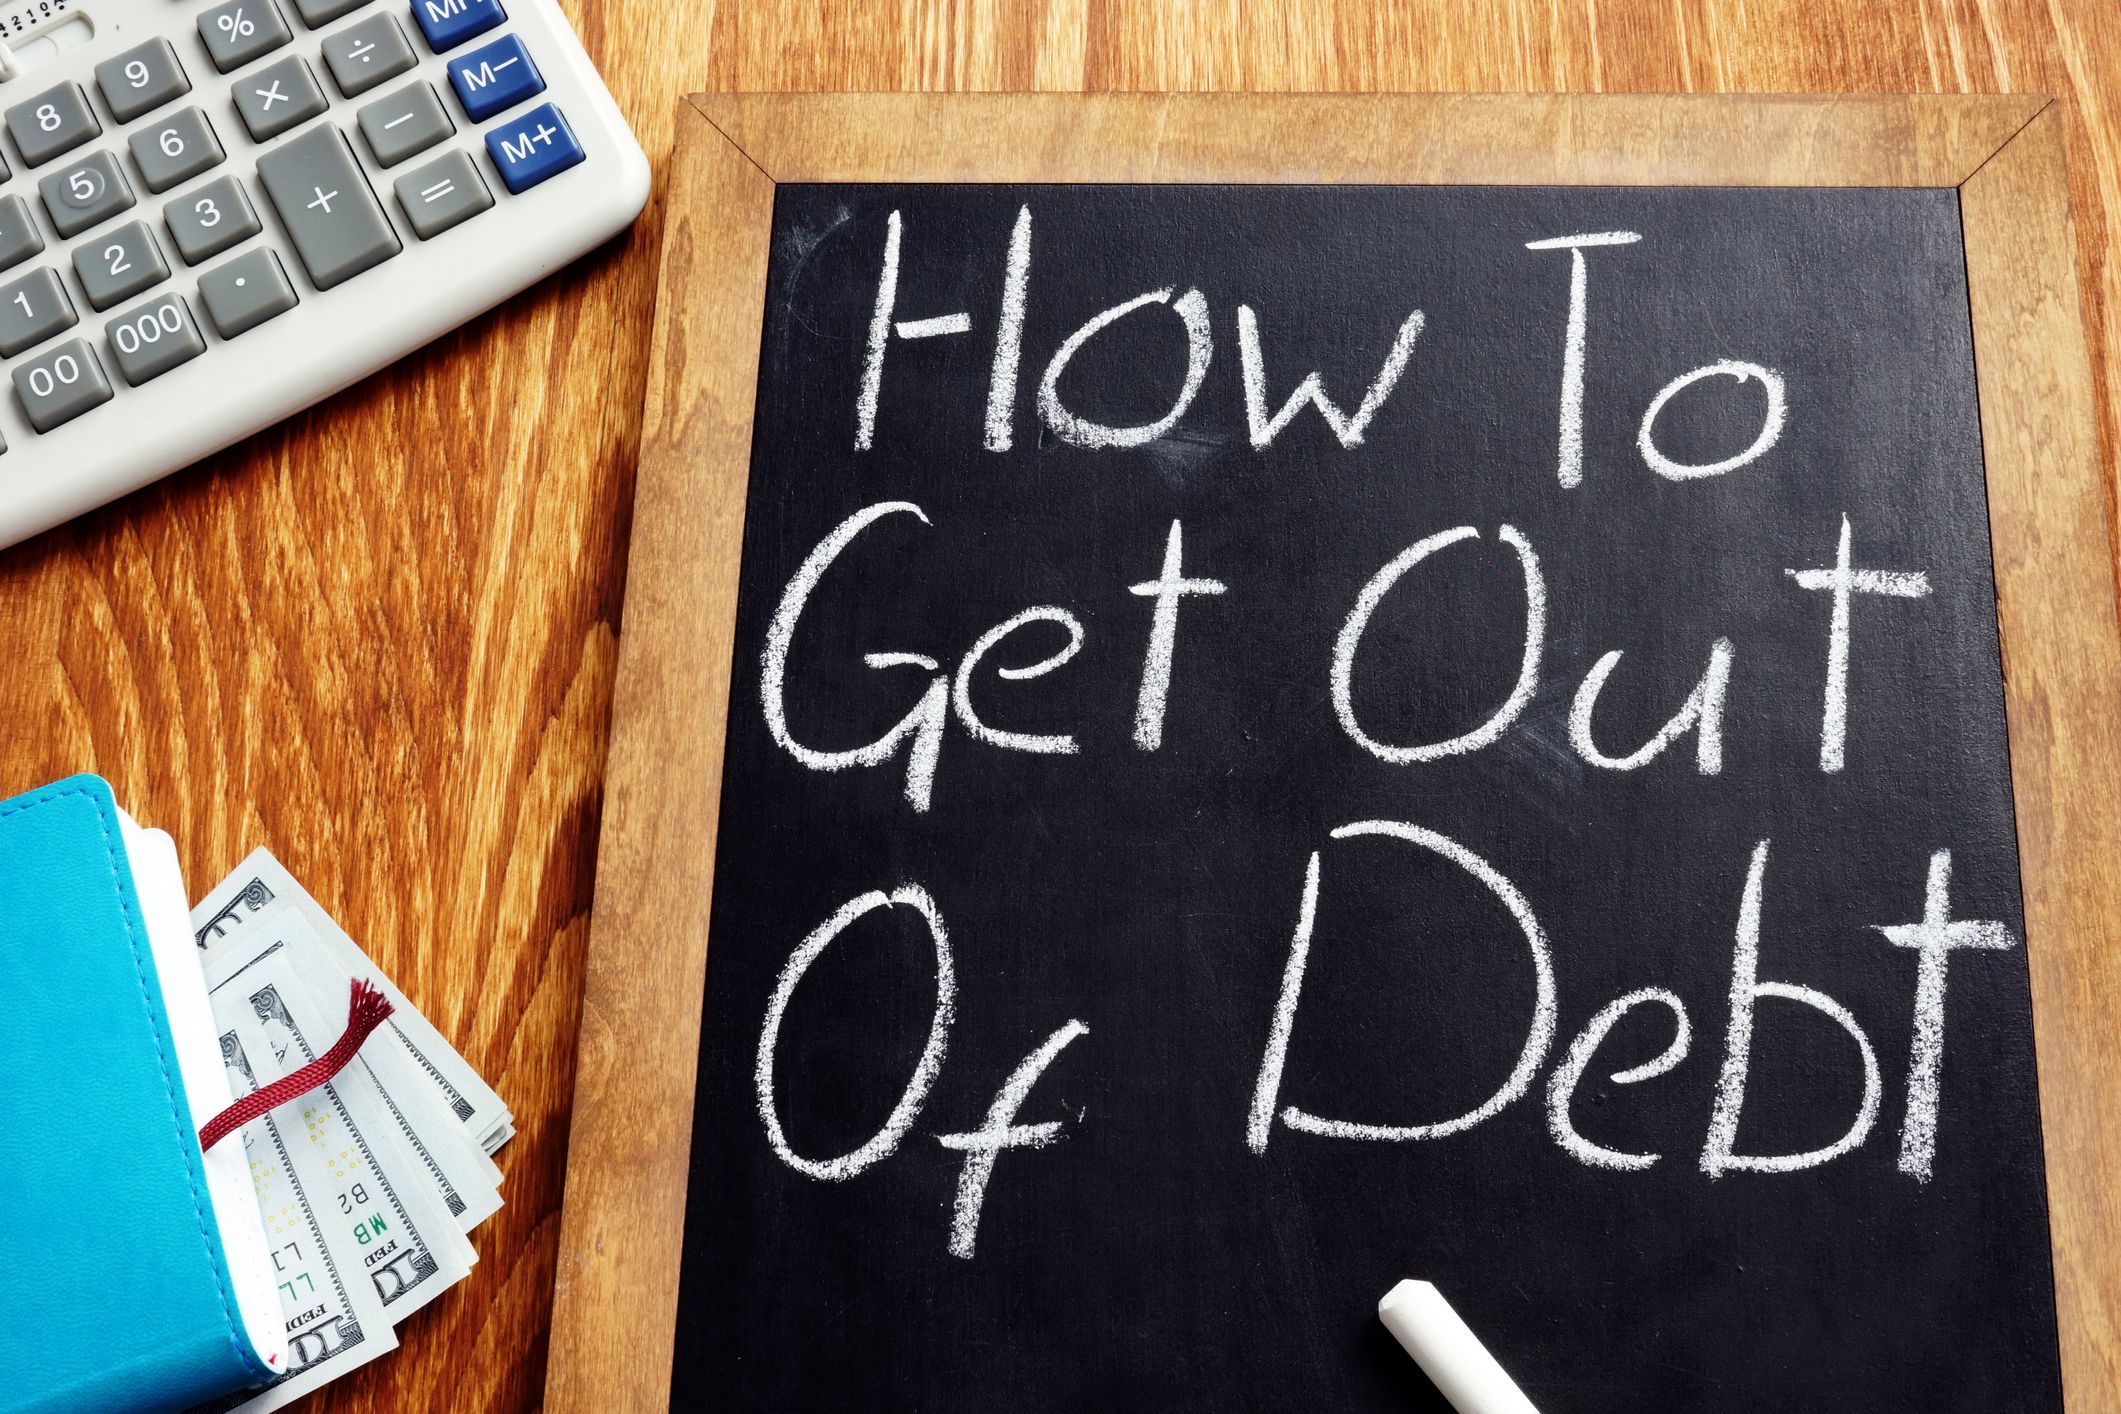 A Brief Guide to Debt Management Consolidation